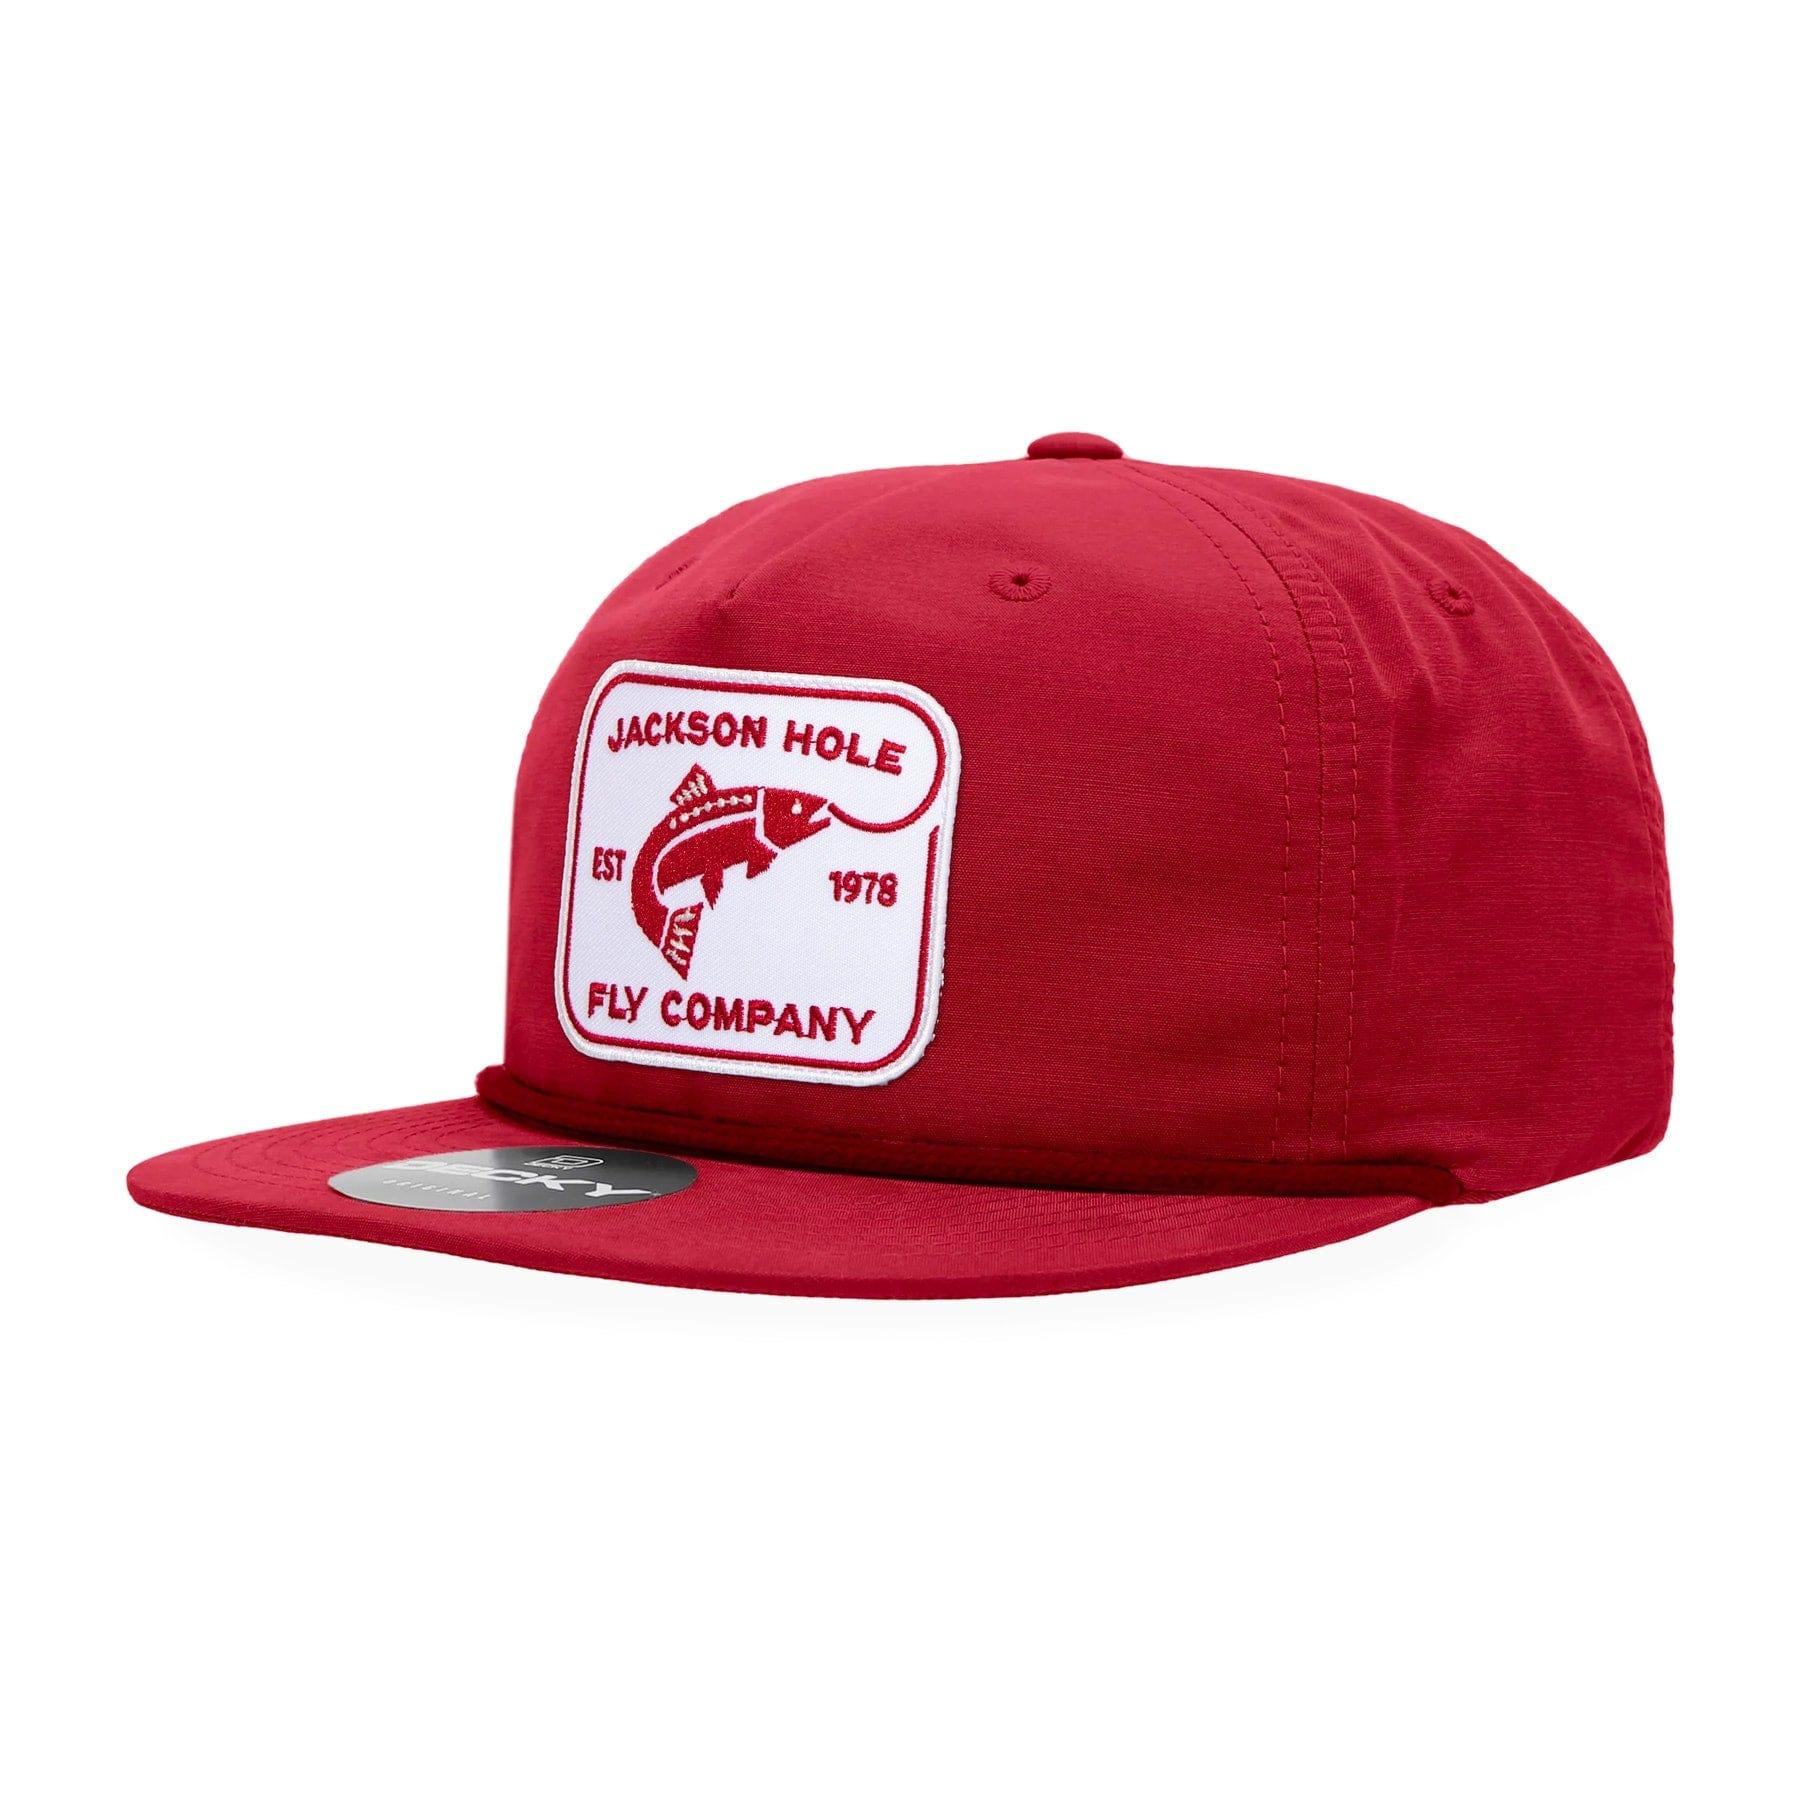 JHFLYCO Brushed Cotton Ball Cap - Rectangle Logo - Adjustable / Red / White Patch